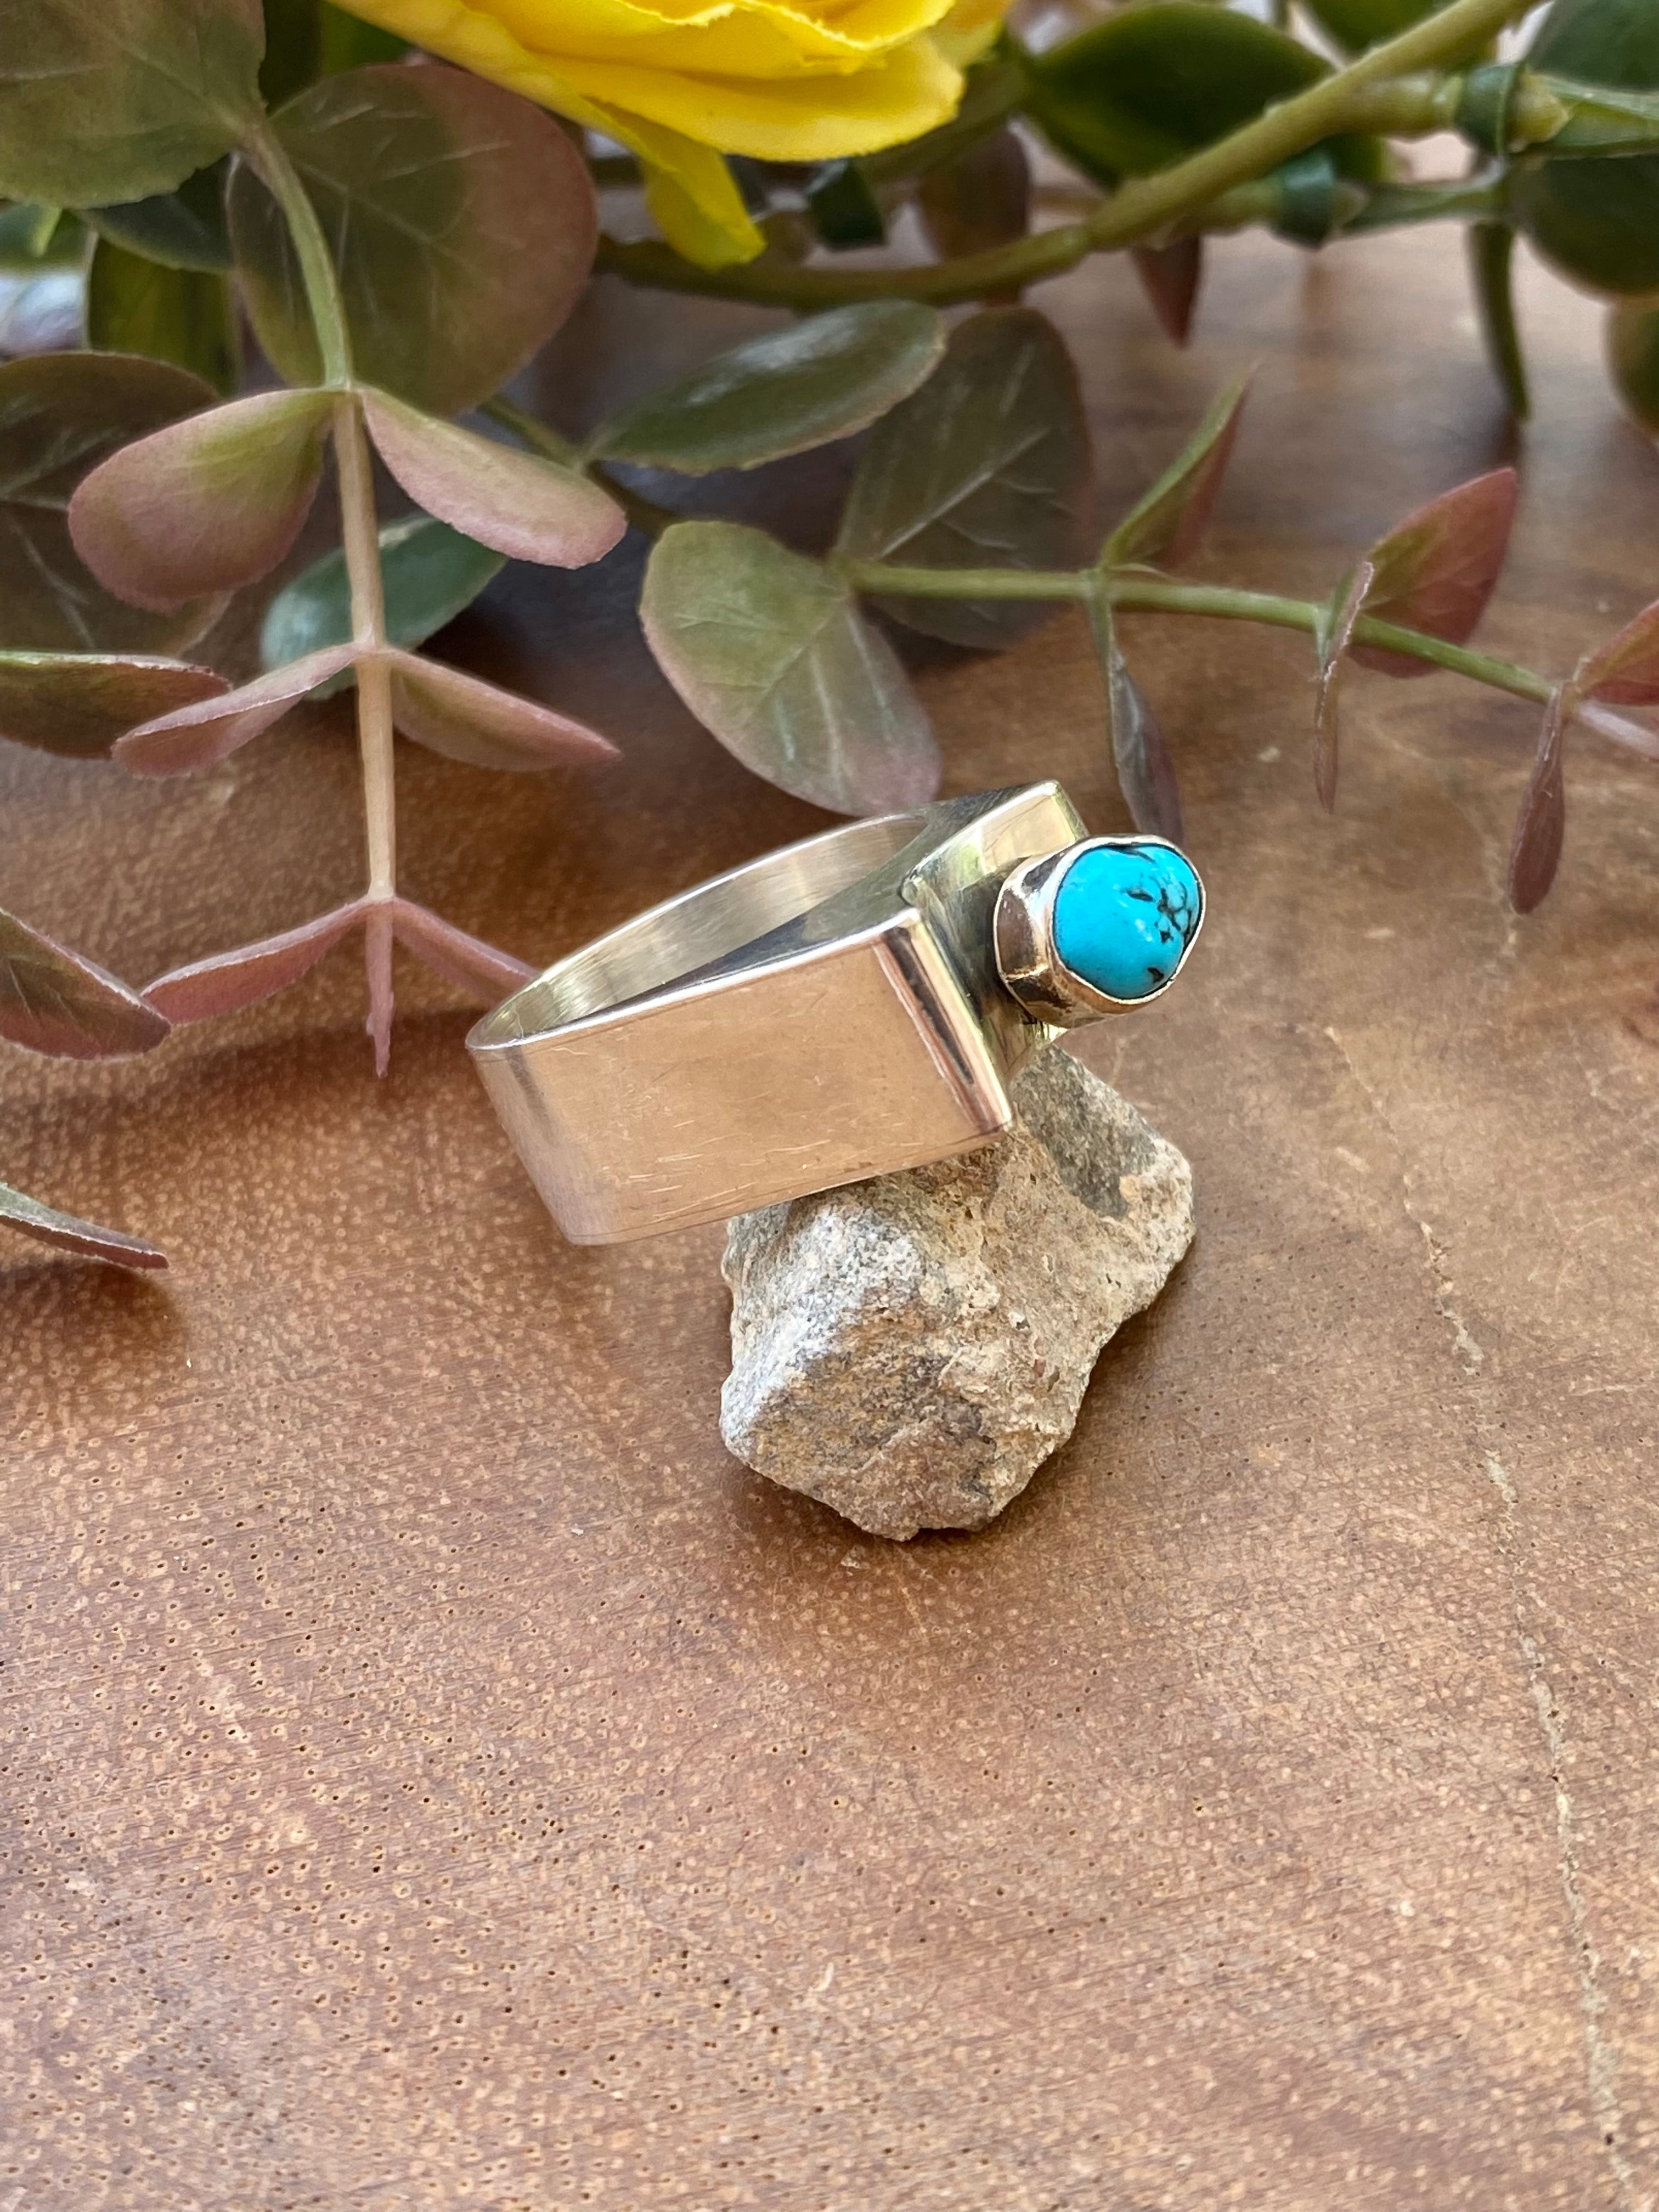 Navajo Made Kingman Turquoise & Sterling Silver Ring Size 8.5